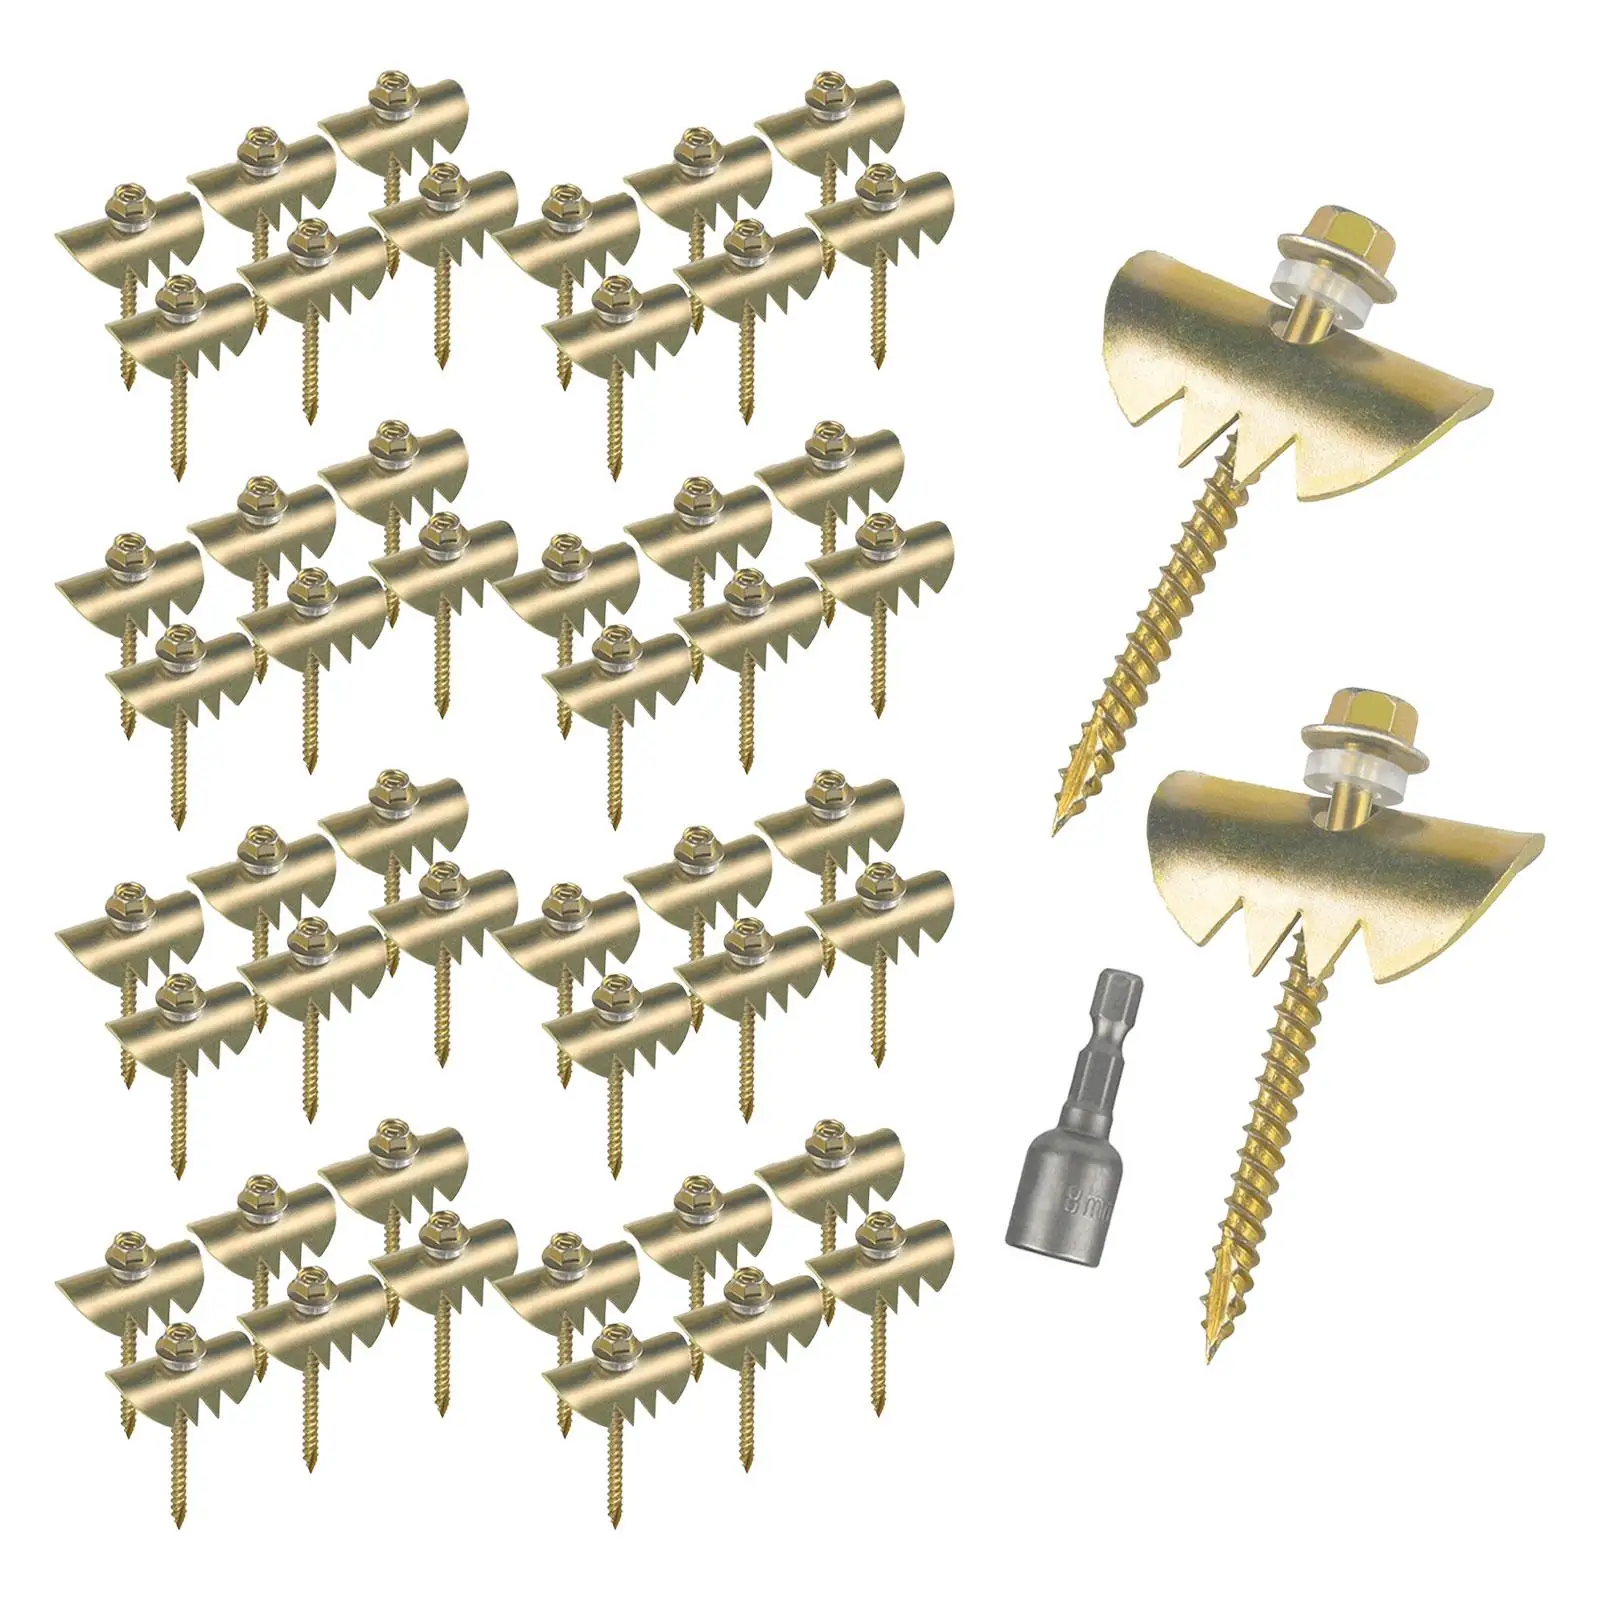 50x Wire Fence Fasteners Quickly Install Galvanized Metal with Screwdriver Strong for Softwoods for Woven Fencing Wire Mesh